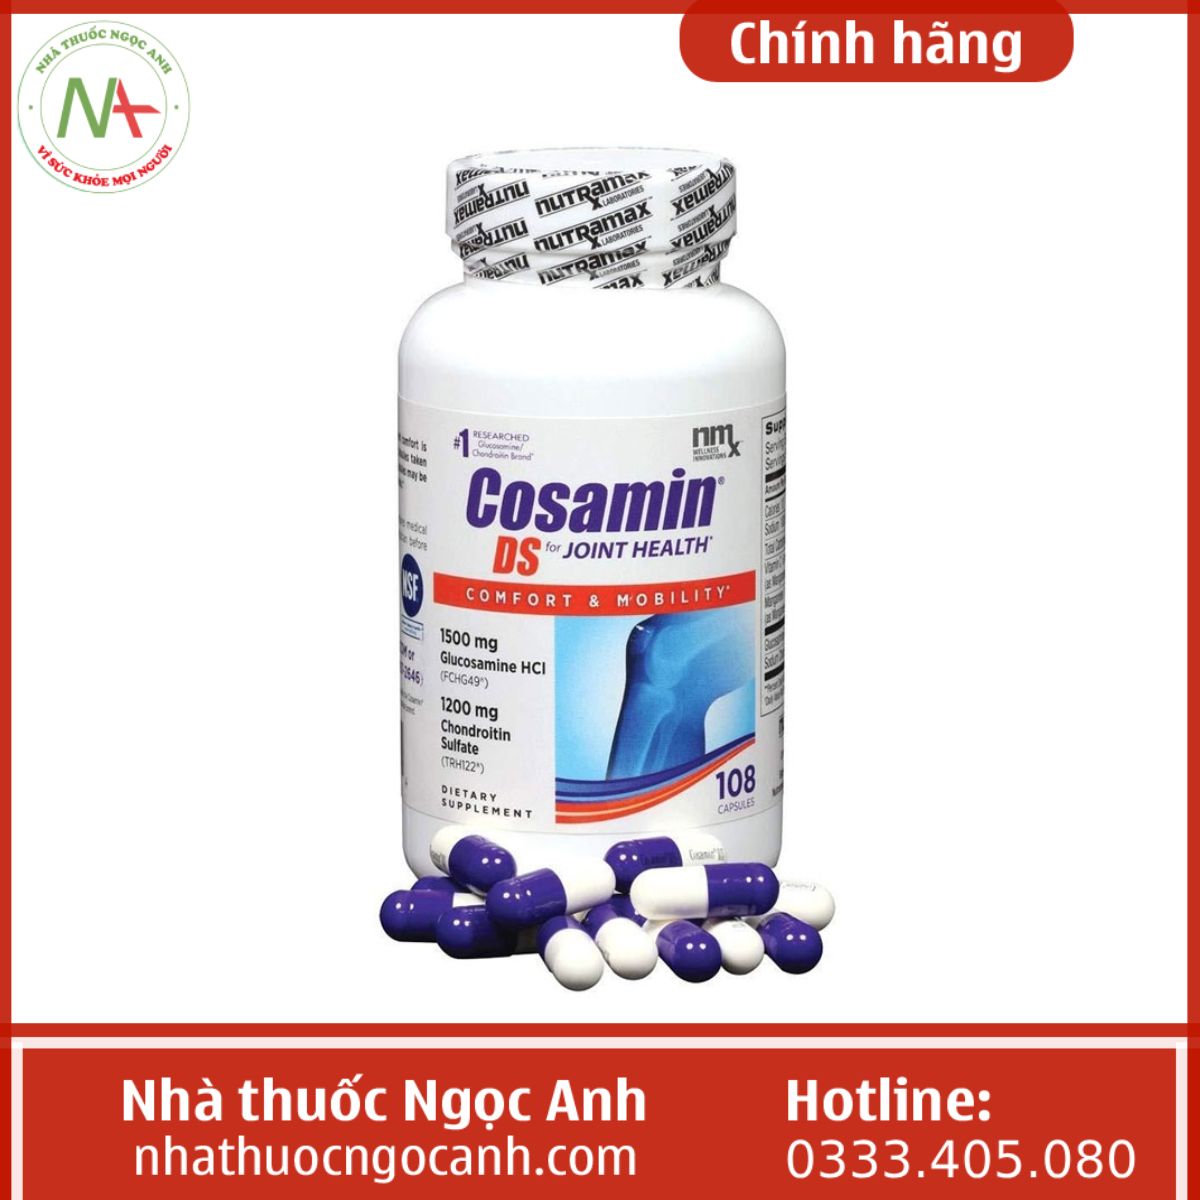 Cosamin DS For Joint Health bổ sụn khớp